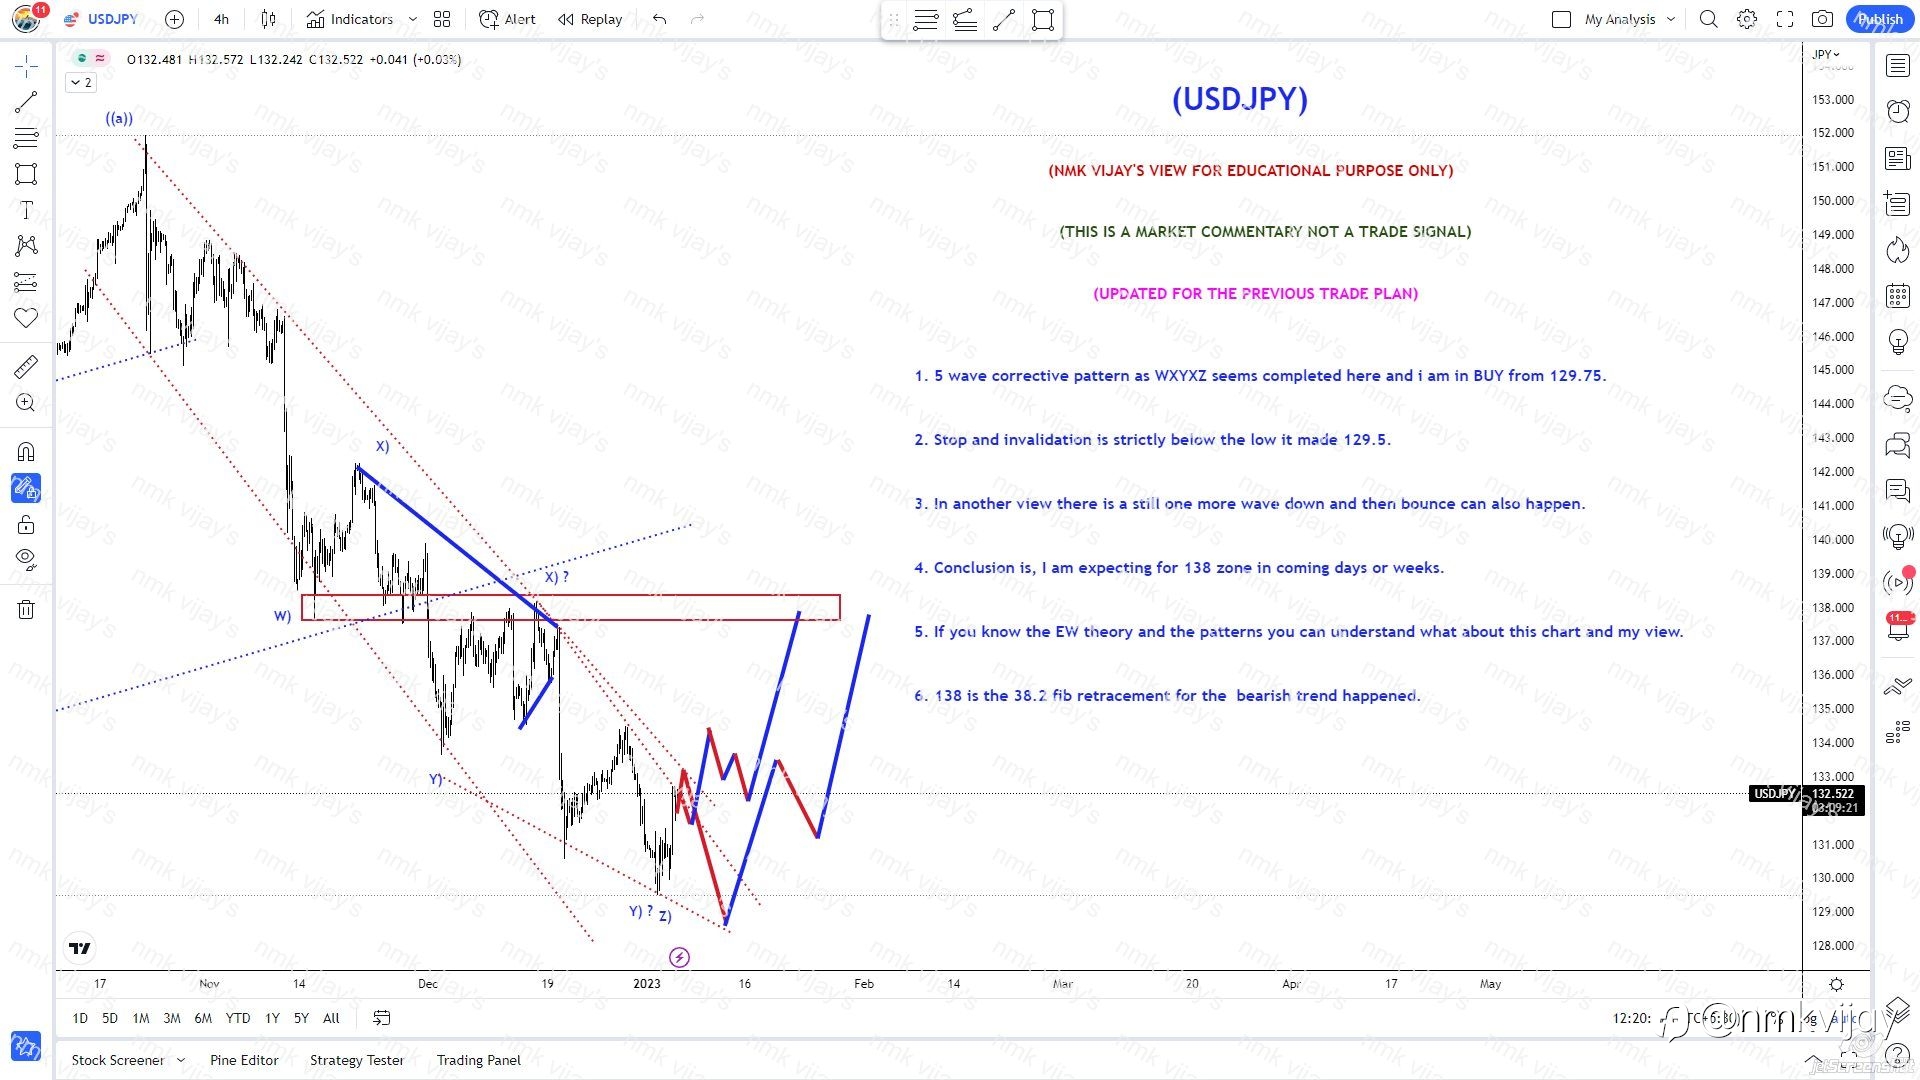 Expecting a bounce to 138 in 3 waves for shorter term.